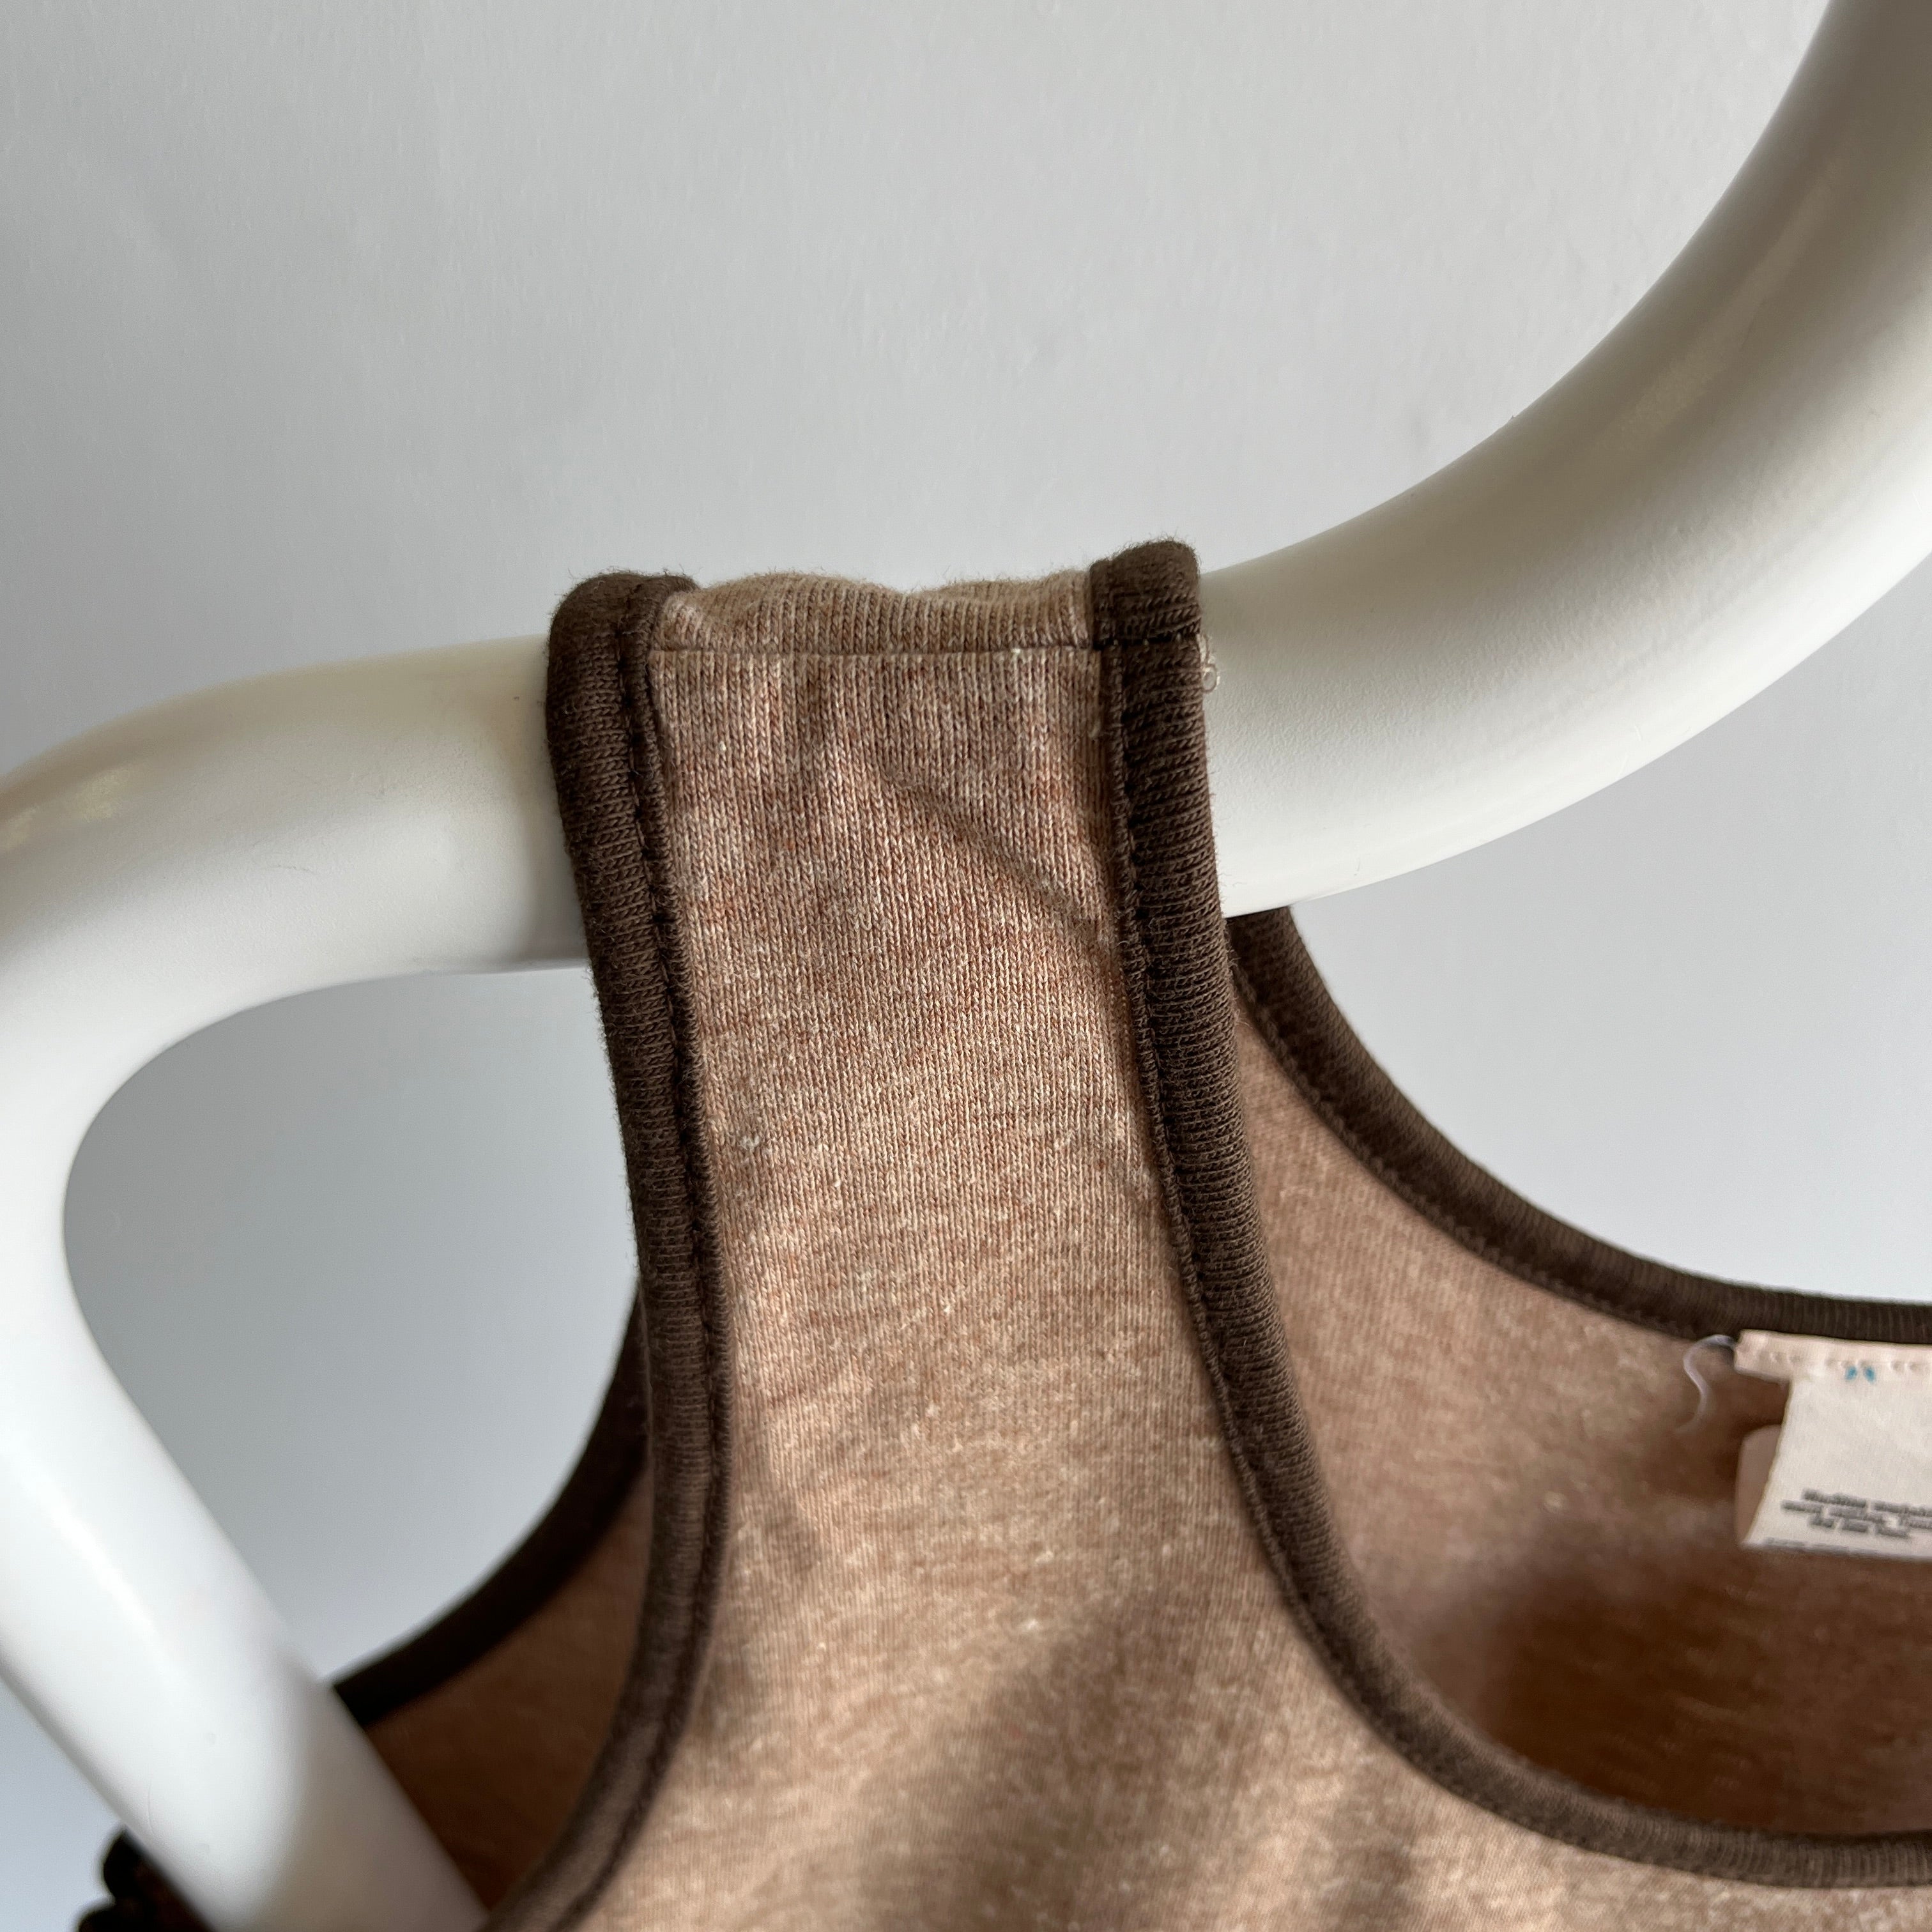 1970s The Cutest Brown Tank Top